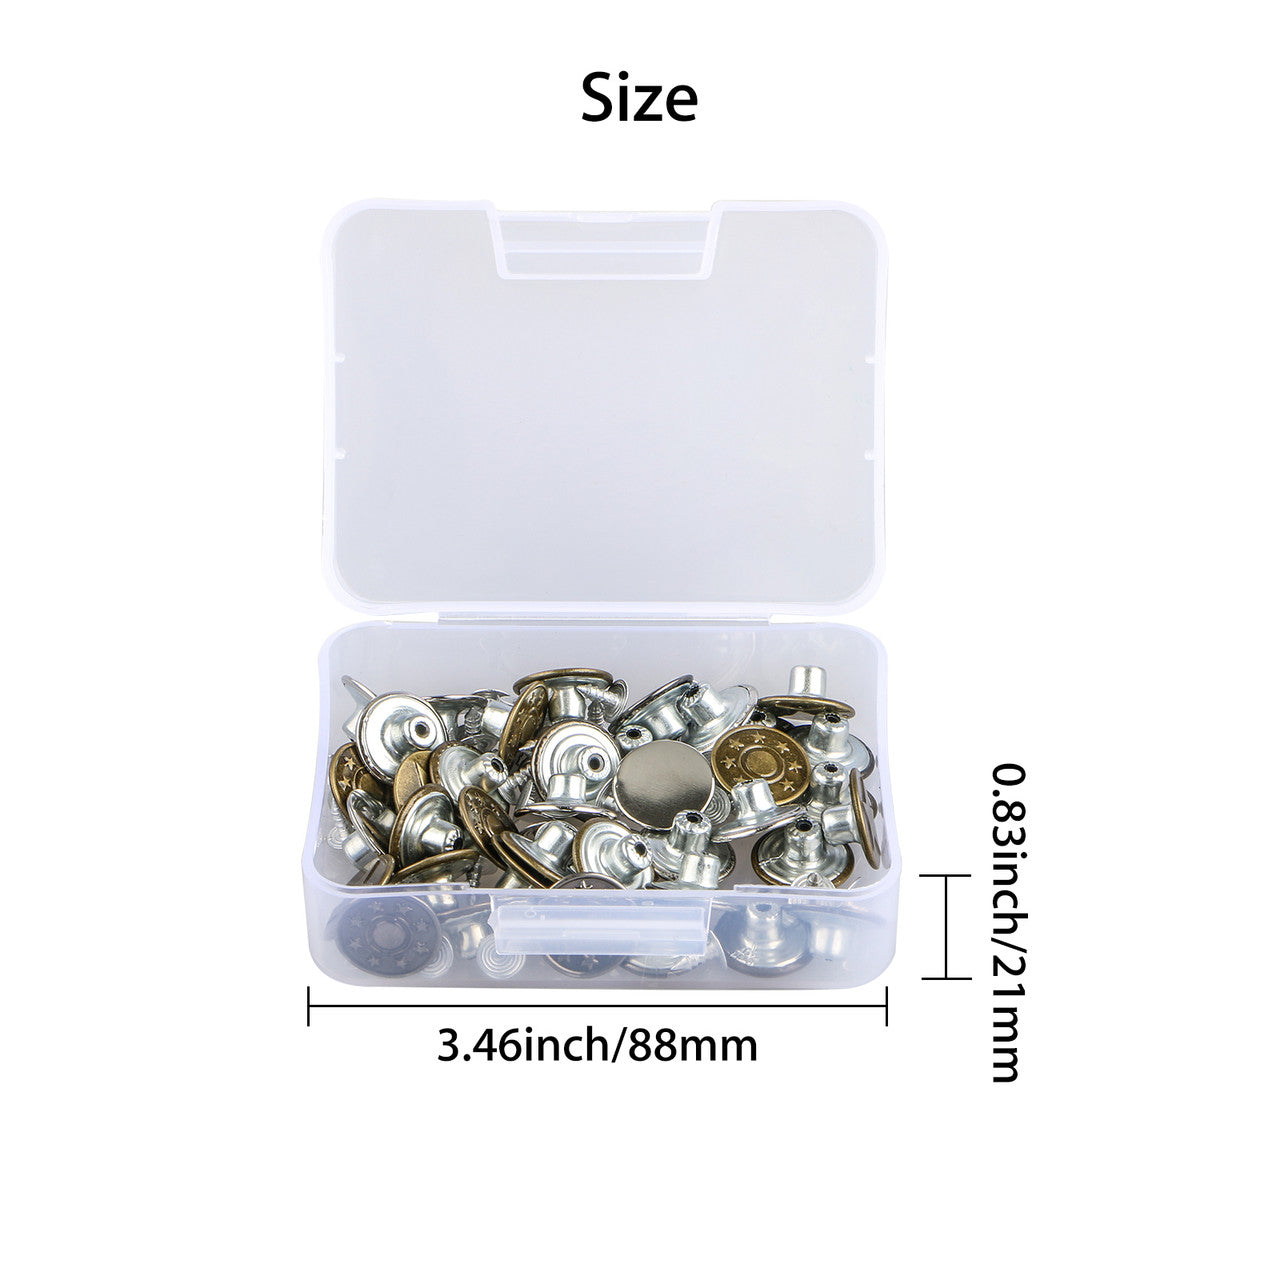 Jeans Button, 4 Styles Jeans Button Metal Tack Button Replacement Kit Fixing Tool Sew & Mend Kit with Plastic Storage Box for Jeans Pants Jacket Trousers, 40Pcs